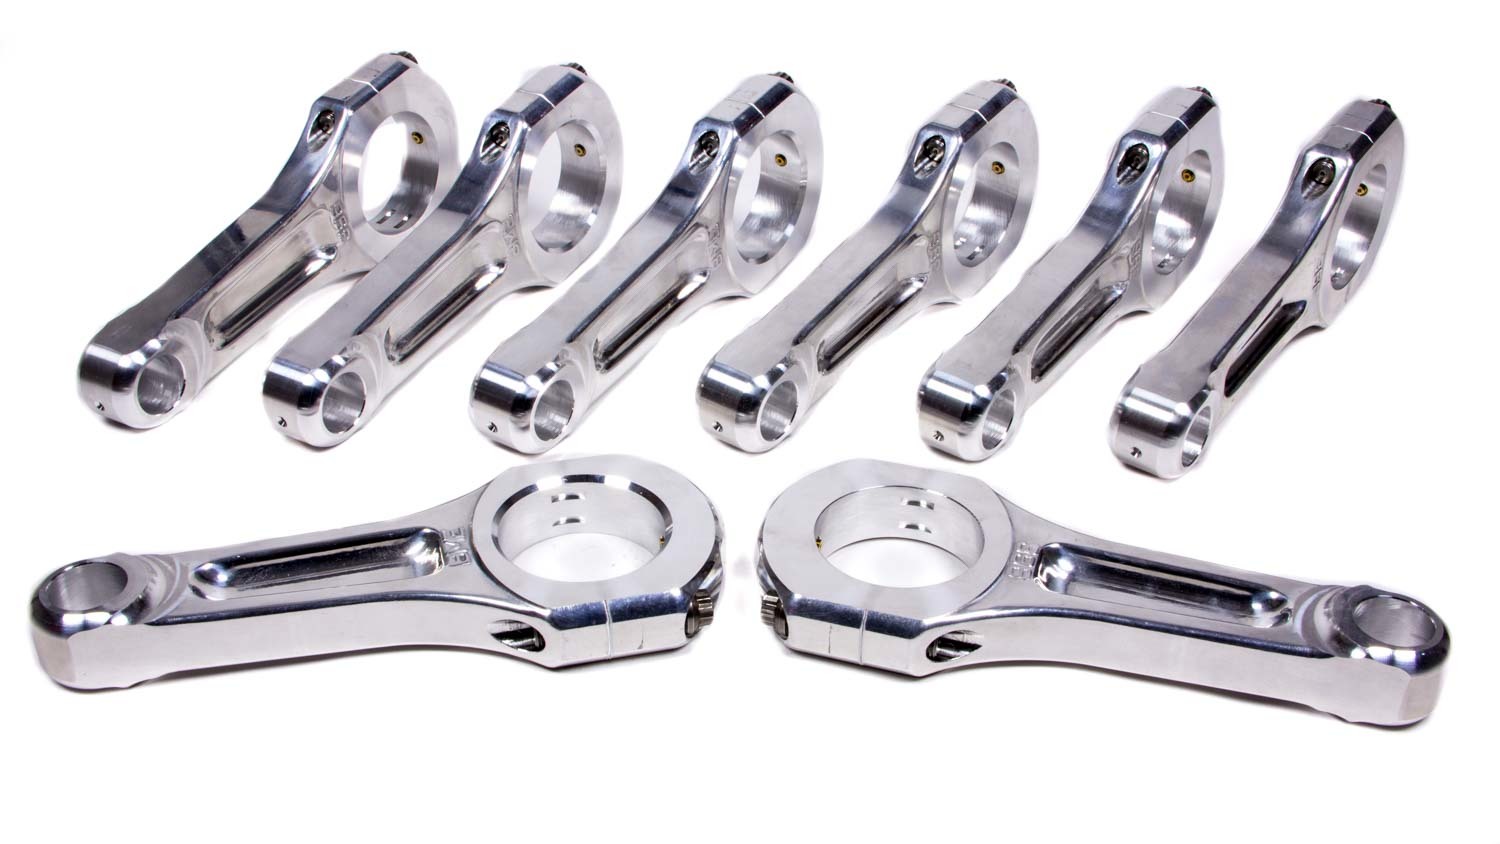 Bill Miller 396565 - Connecting Rod, I Beam, 6.700 in Long, Bushed, 7/16 in Cap Screws, Forged Aluminum, Big Block Chevy, Set of 8